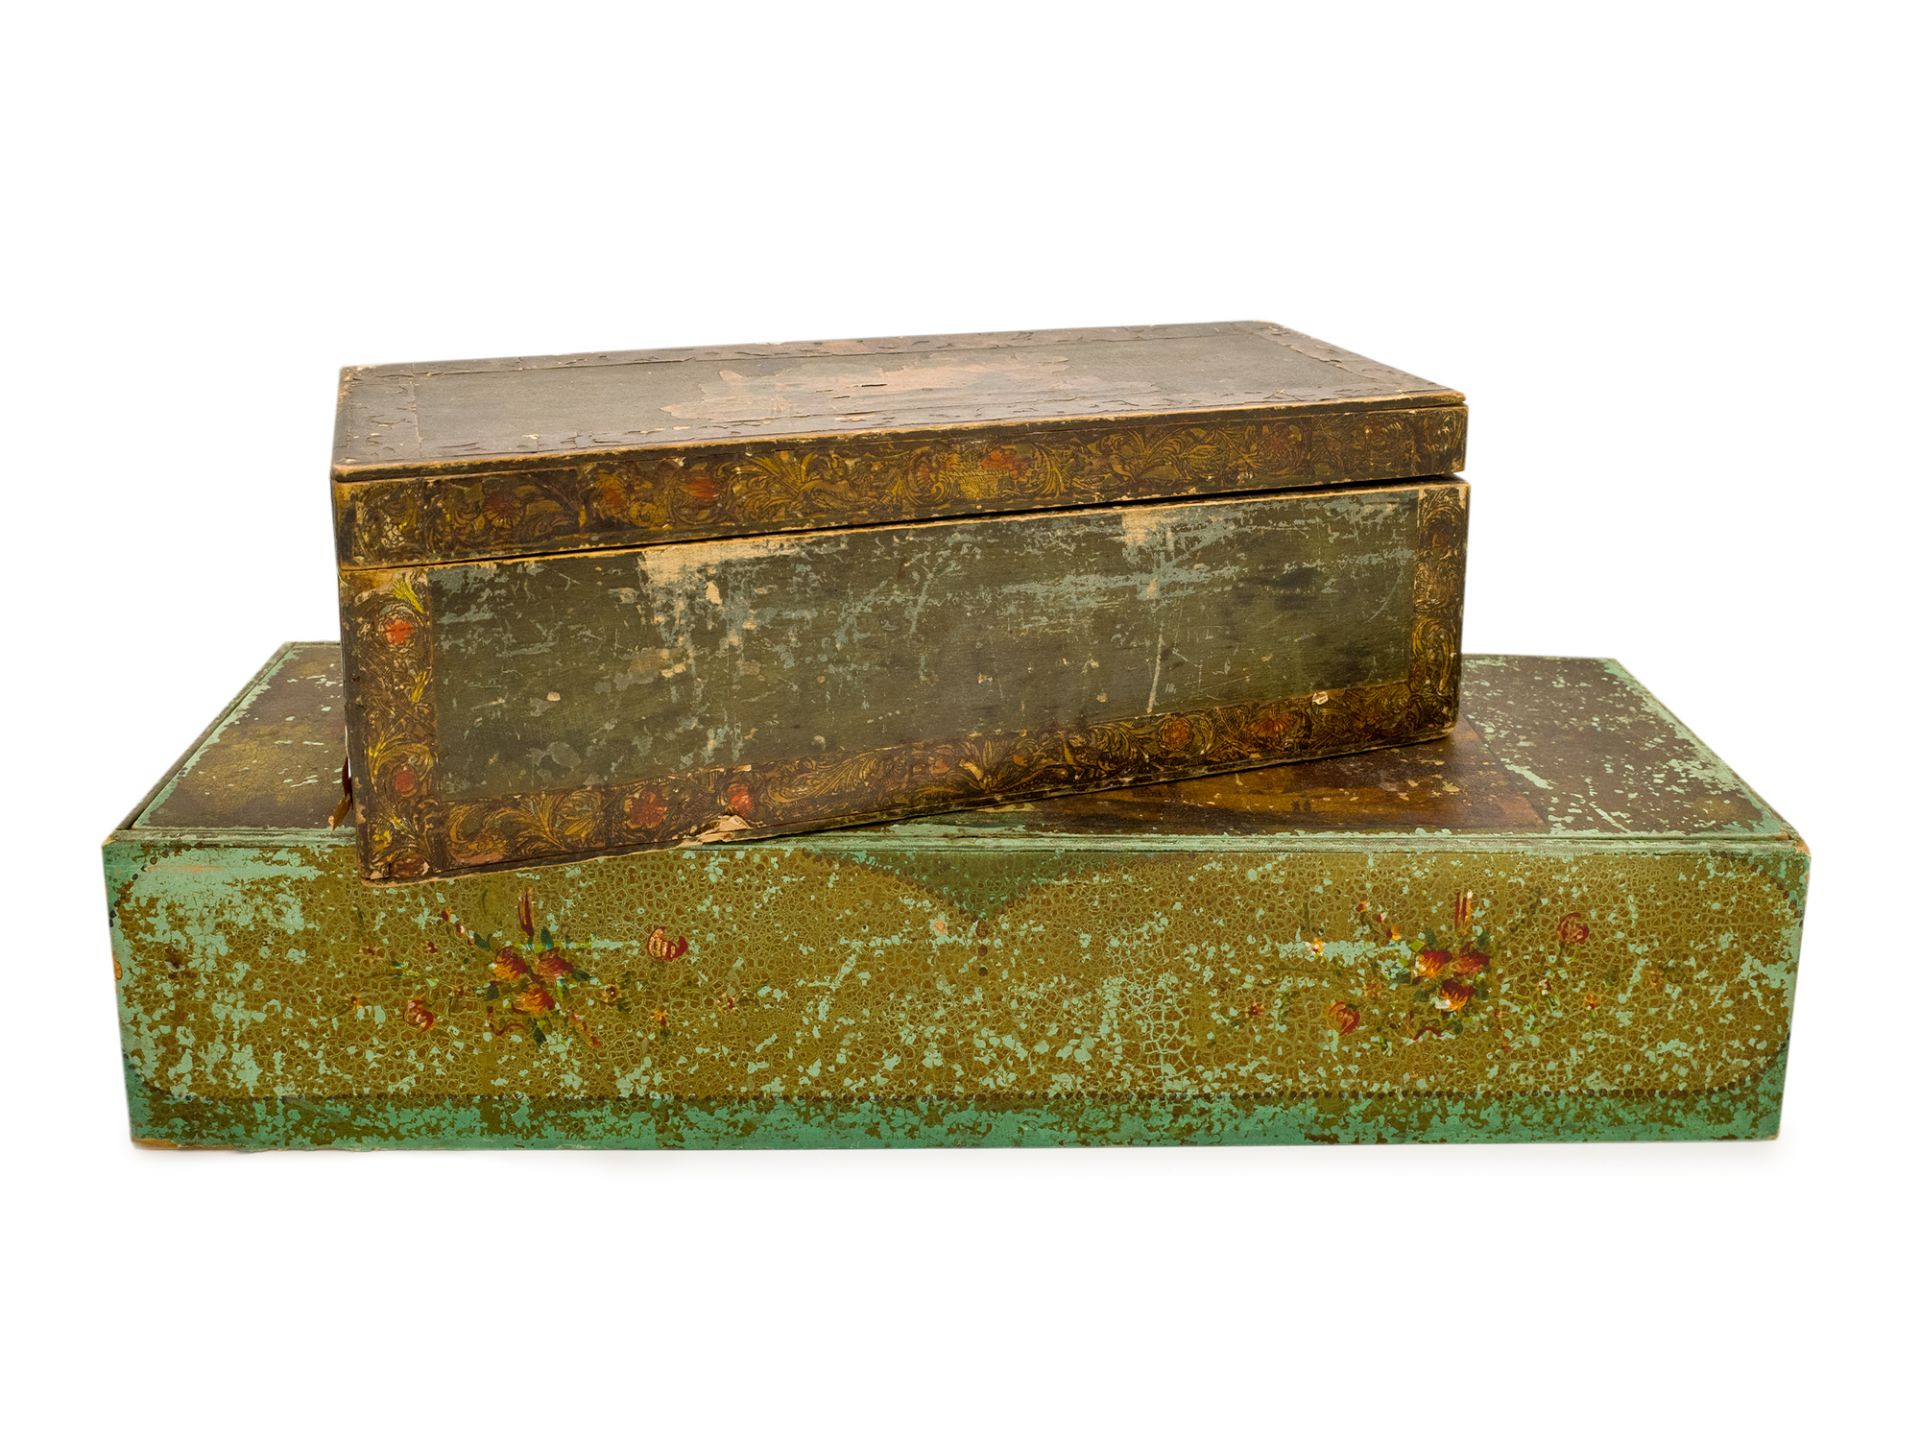 A pair of 19th century lacca povera style European boxes